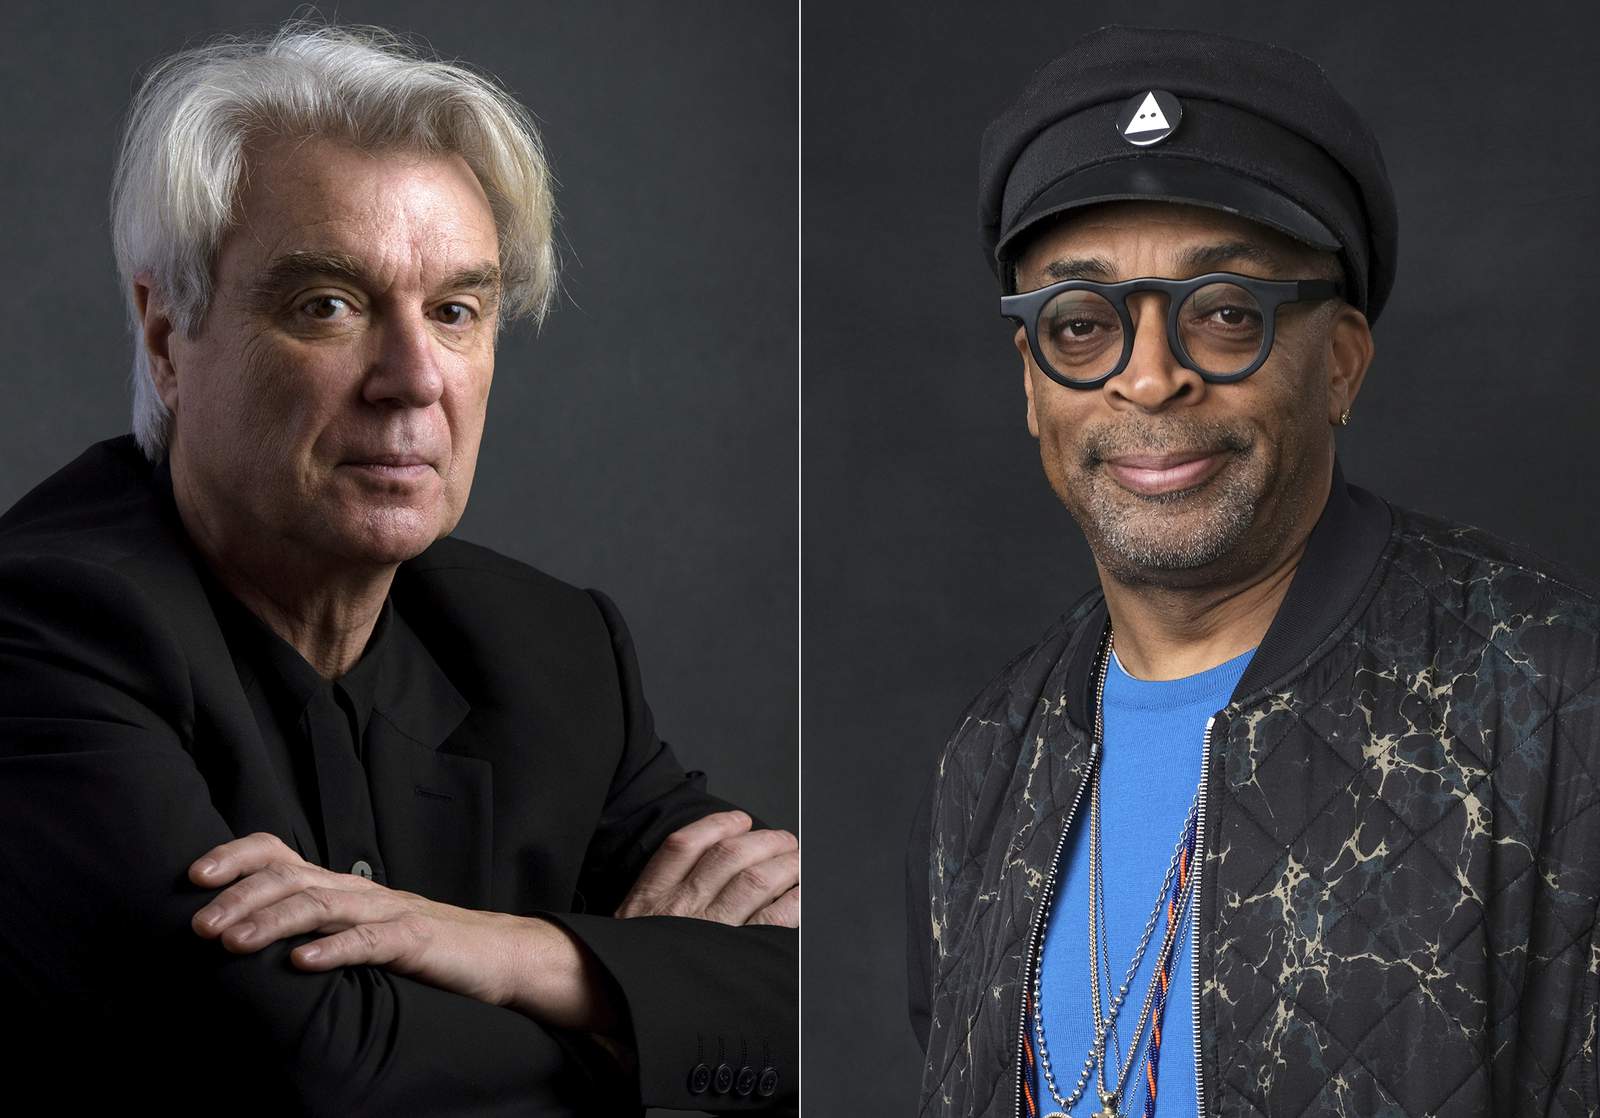 Spike Lee doc of David Byrne's Broadway show to open TIFF